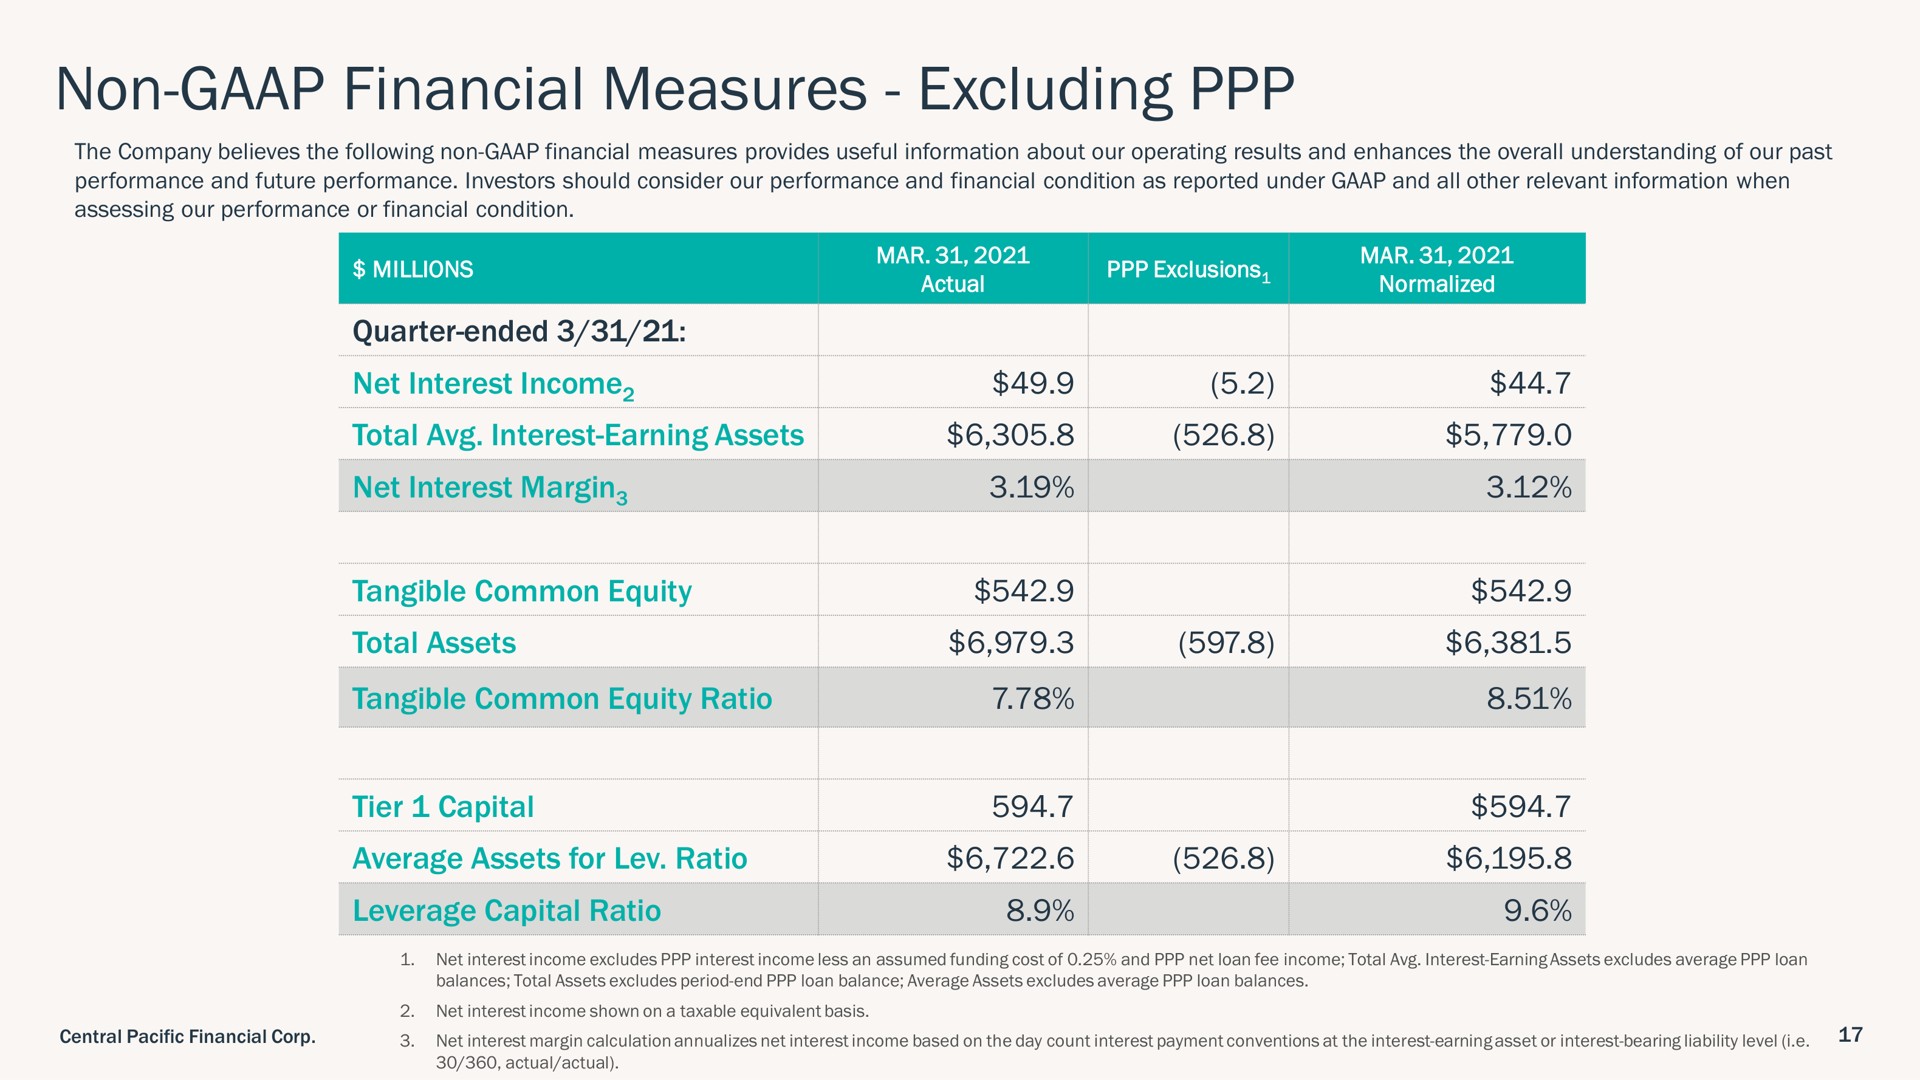 non financial measures excluding total interest earning assets net interest margin total assets tier capital | Central Pacific Financial